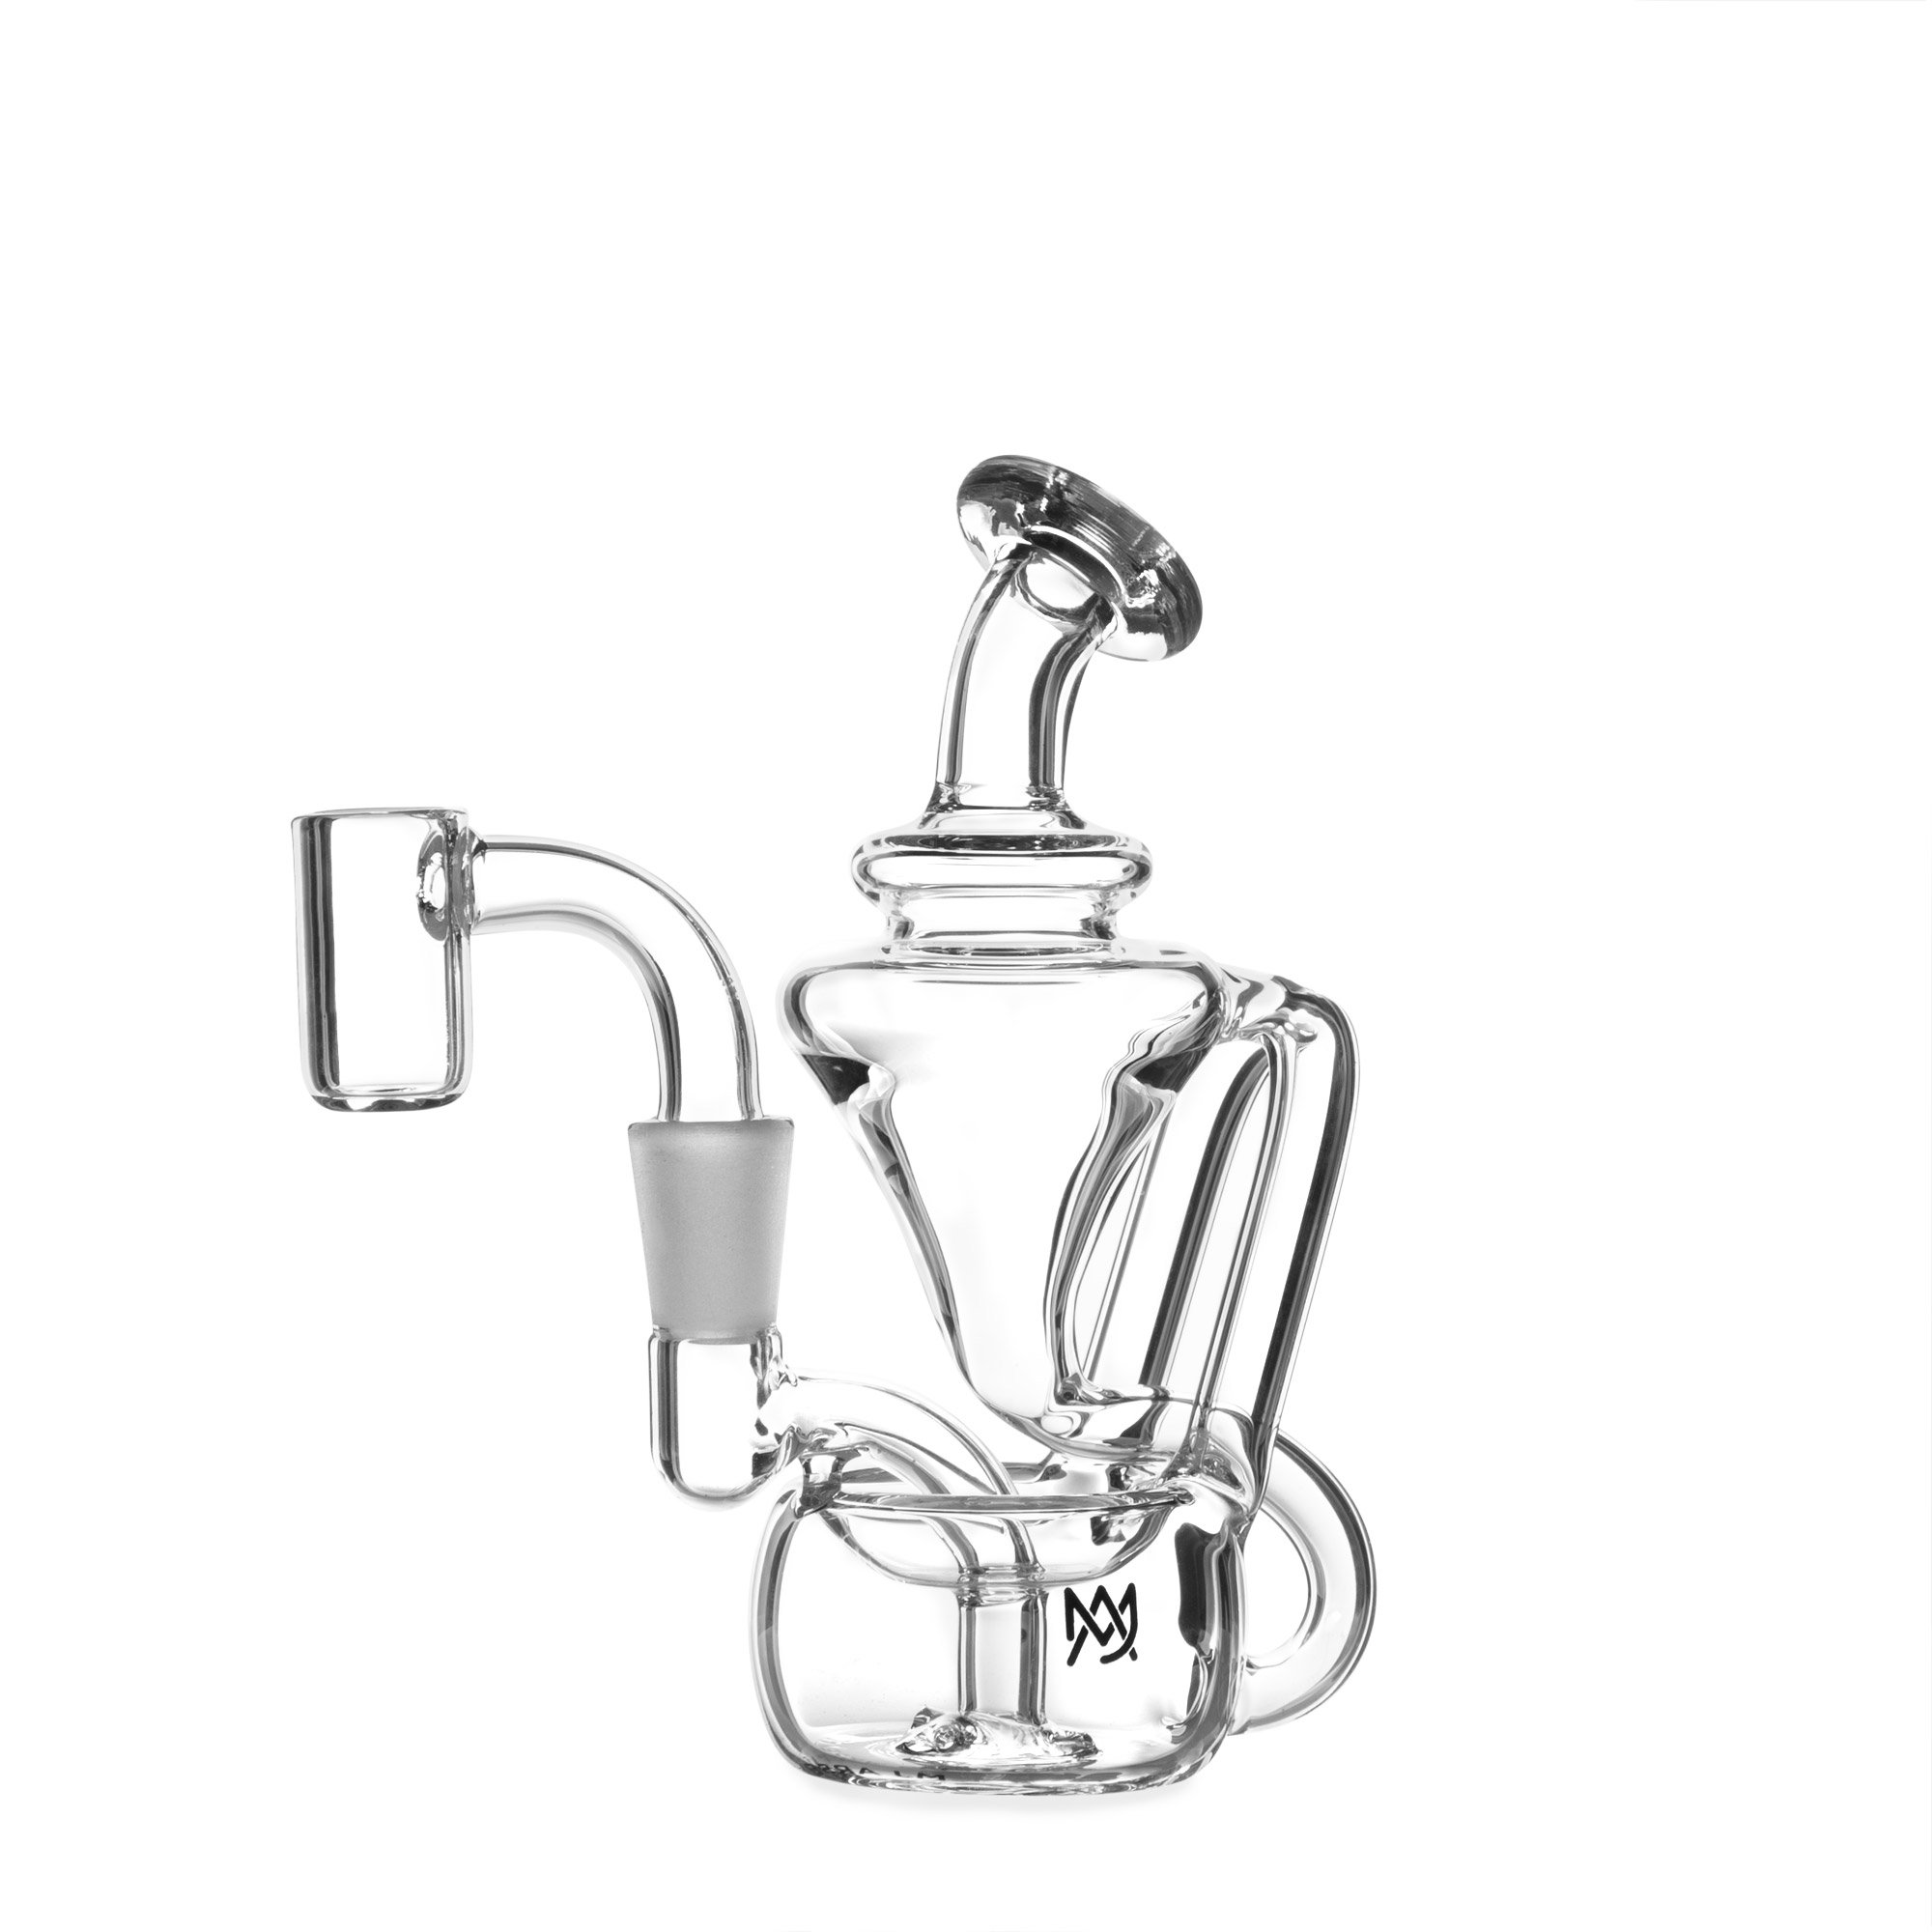 Mj Arsenal 'Claude' Mini Rig / $ 48.99 Available At 420 Science